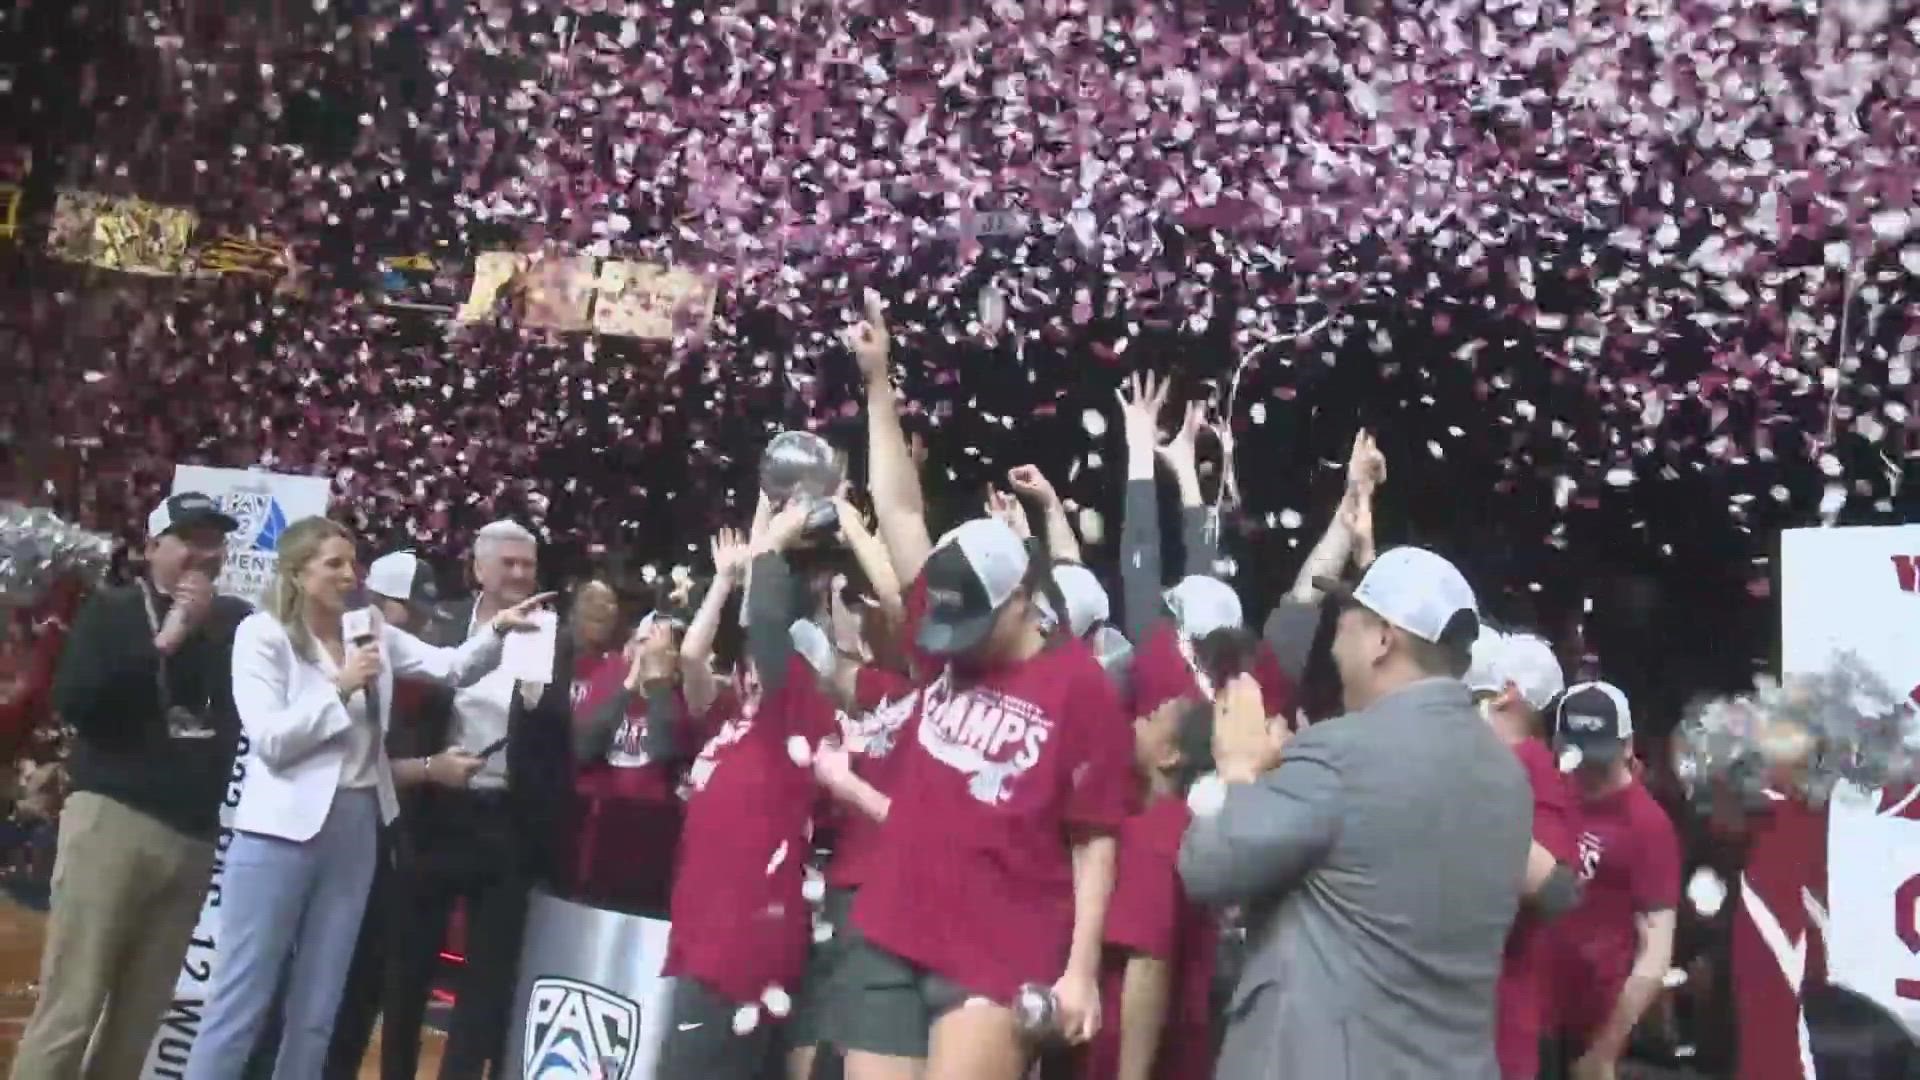 Charlisse Leger-Walker scored 23 points and Bella Murekatete added 21 to help WSU earn a trip to the NCAA Tourney by beating No. 19 UCLA 65-61 for the Pac-12 Title.